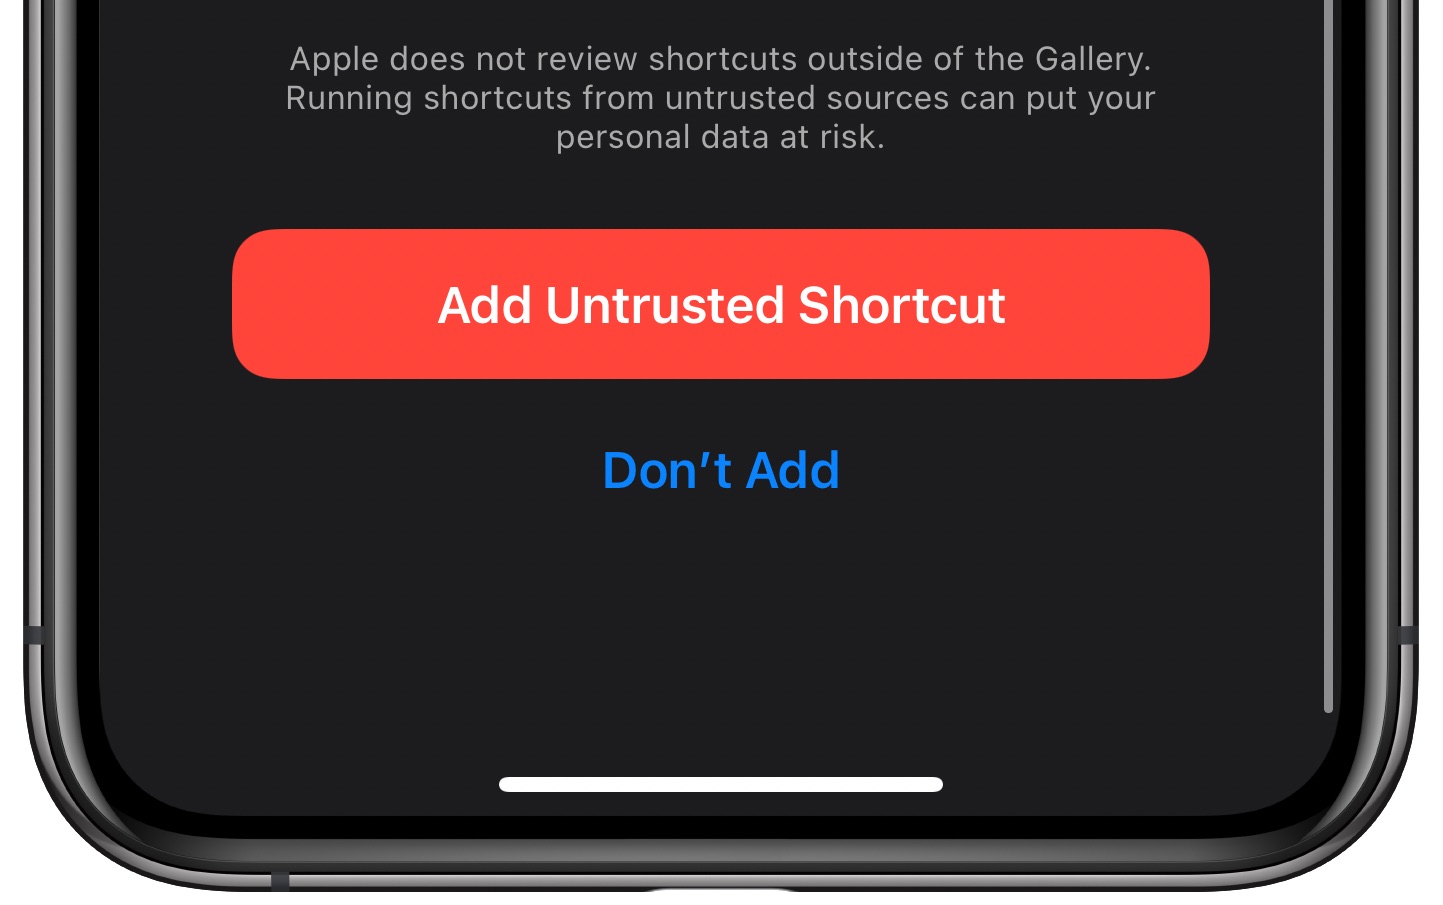 change iPhone wallpaper automatically - Add Untrusted Shortcut